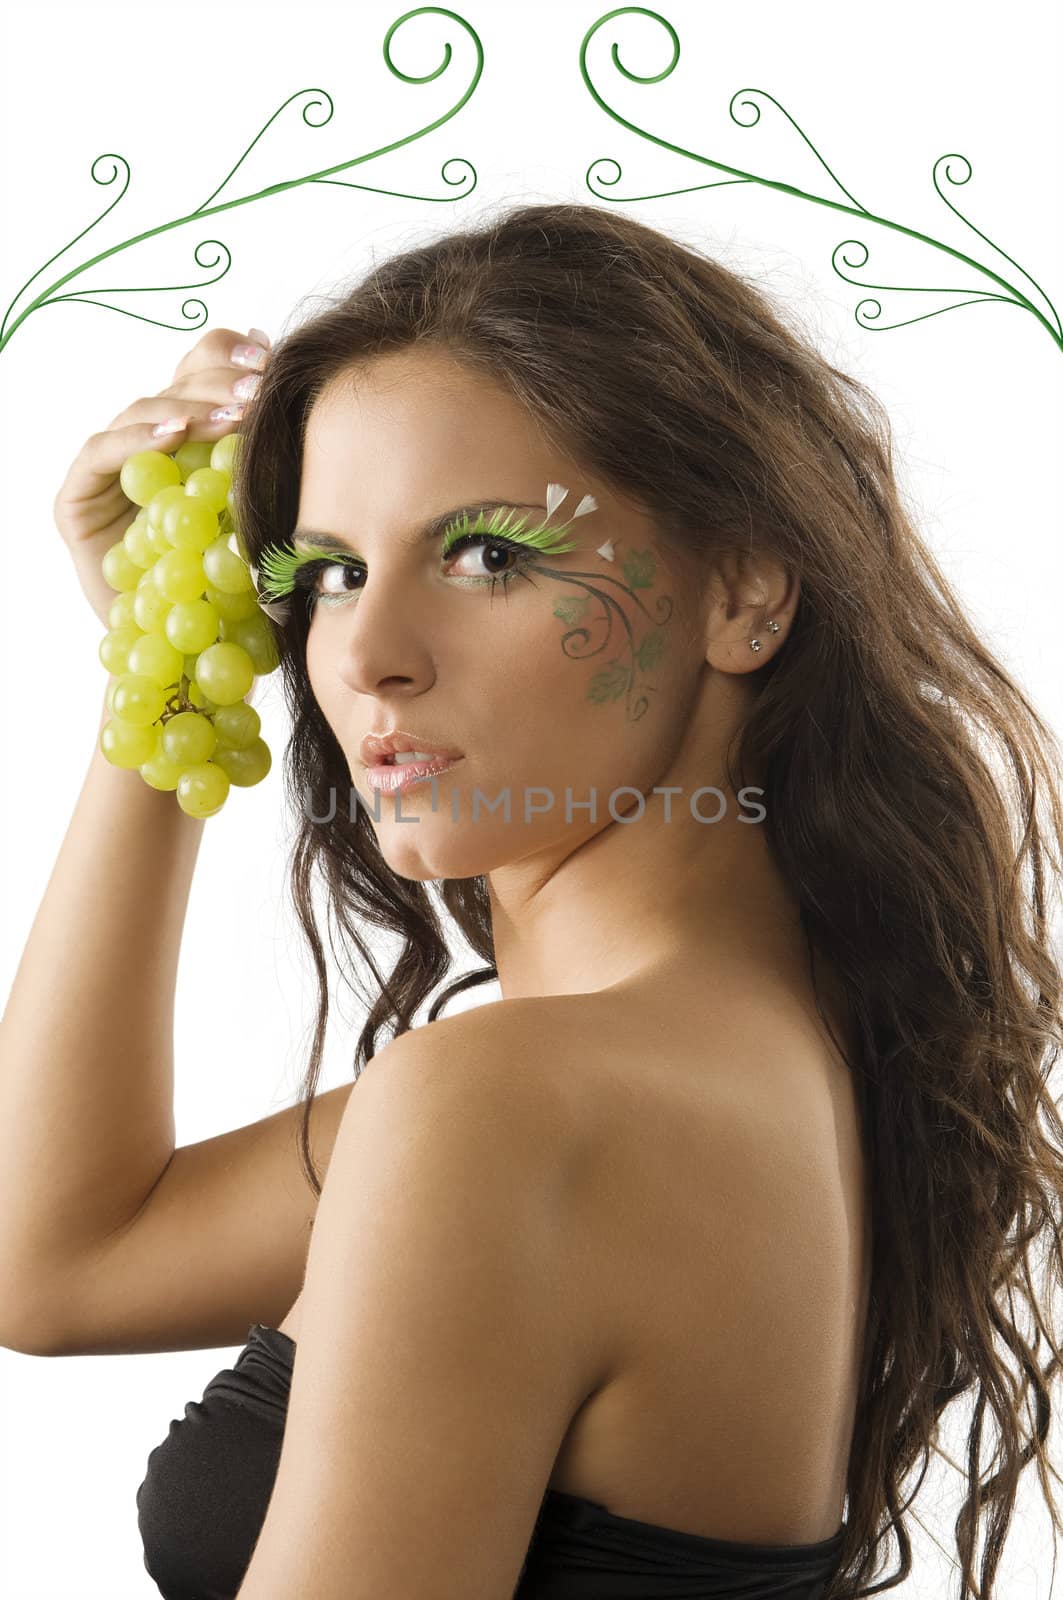 portrait of a cute brunette with bodypaint on her face keeping green grape near